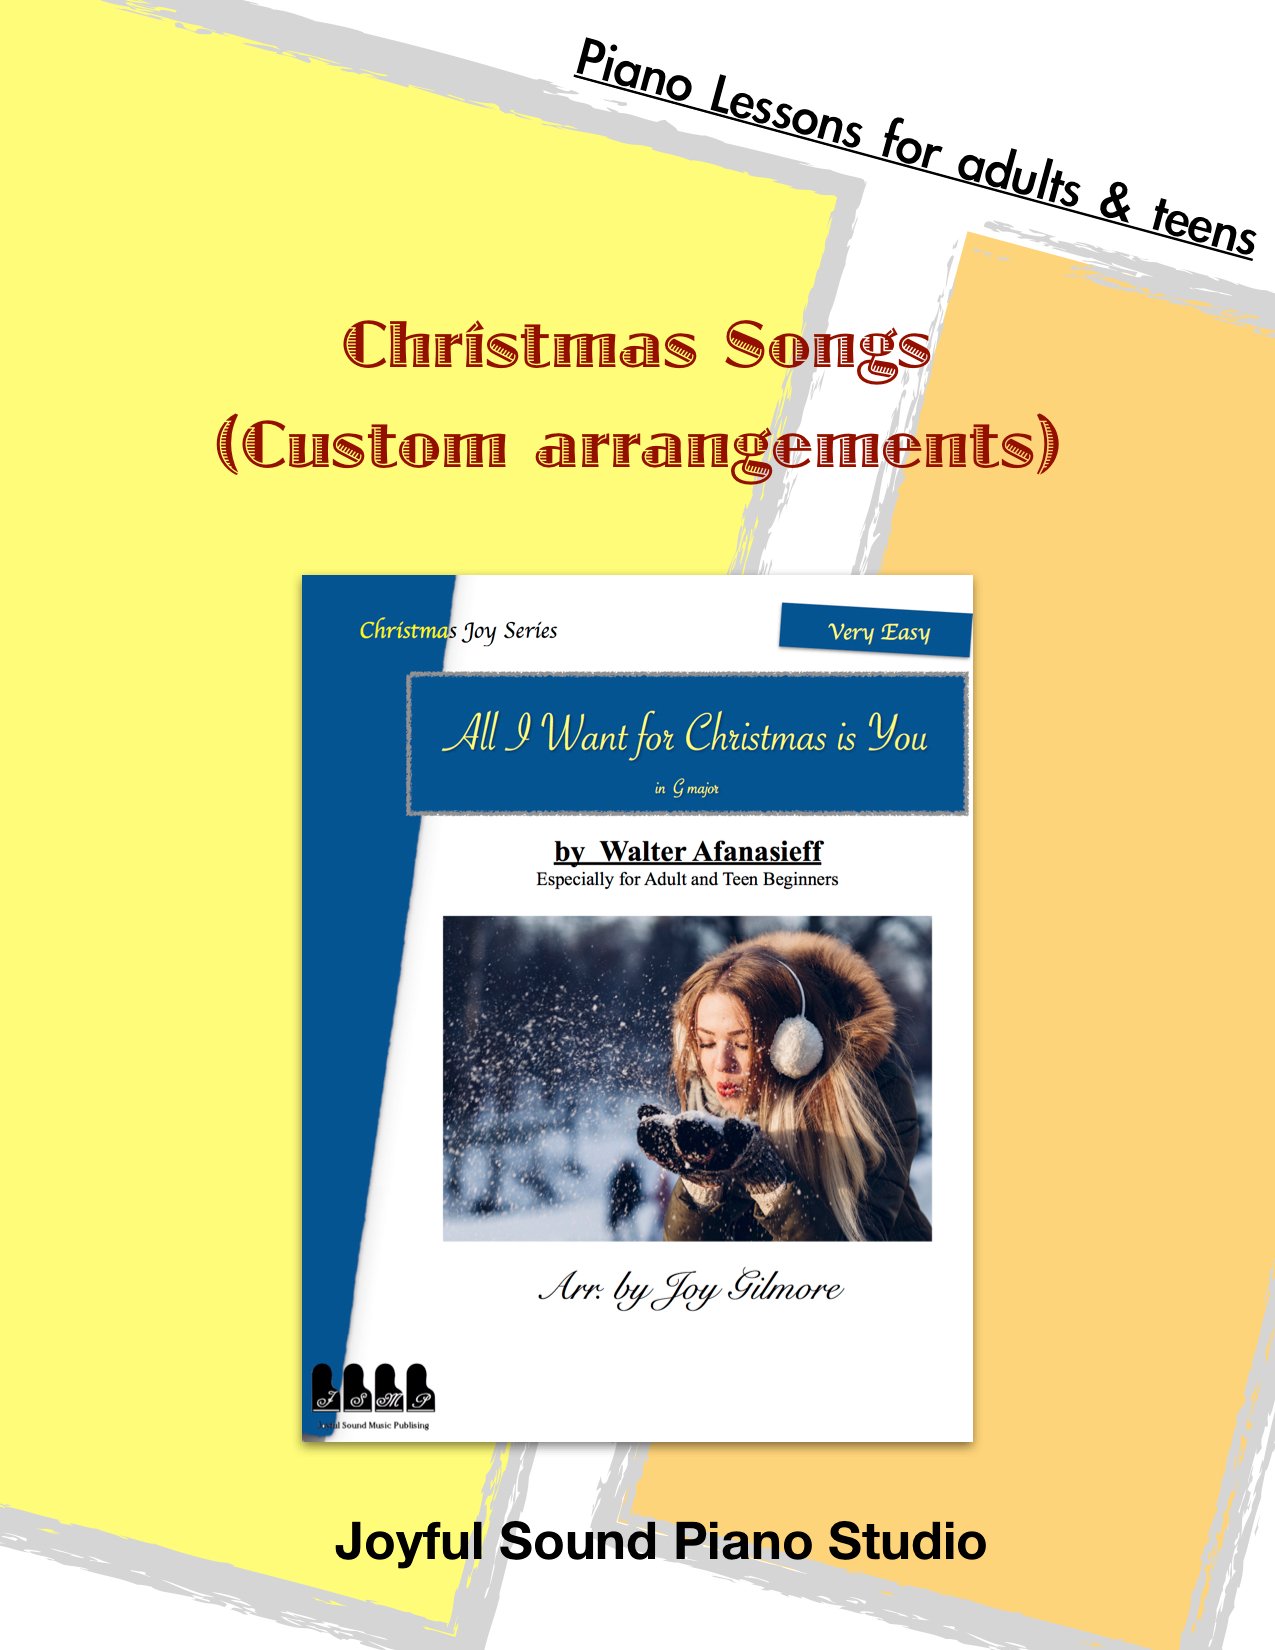 31_Lessons activities_Christmas